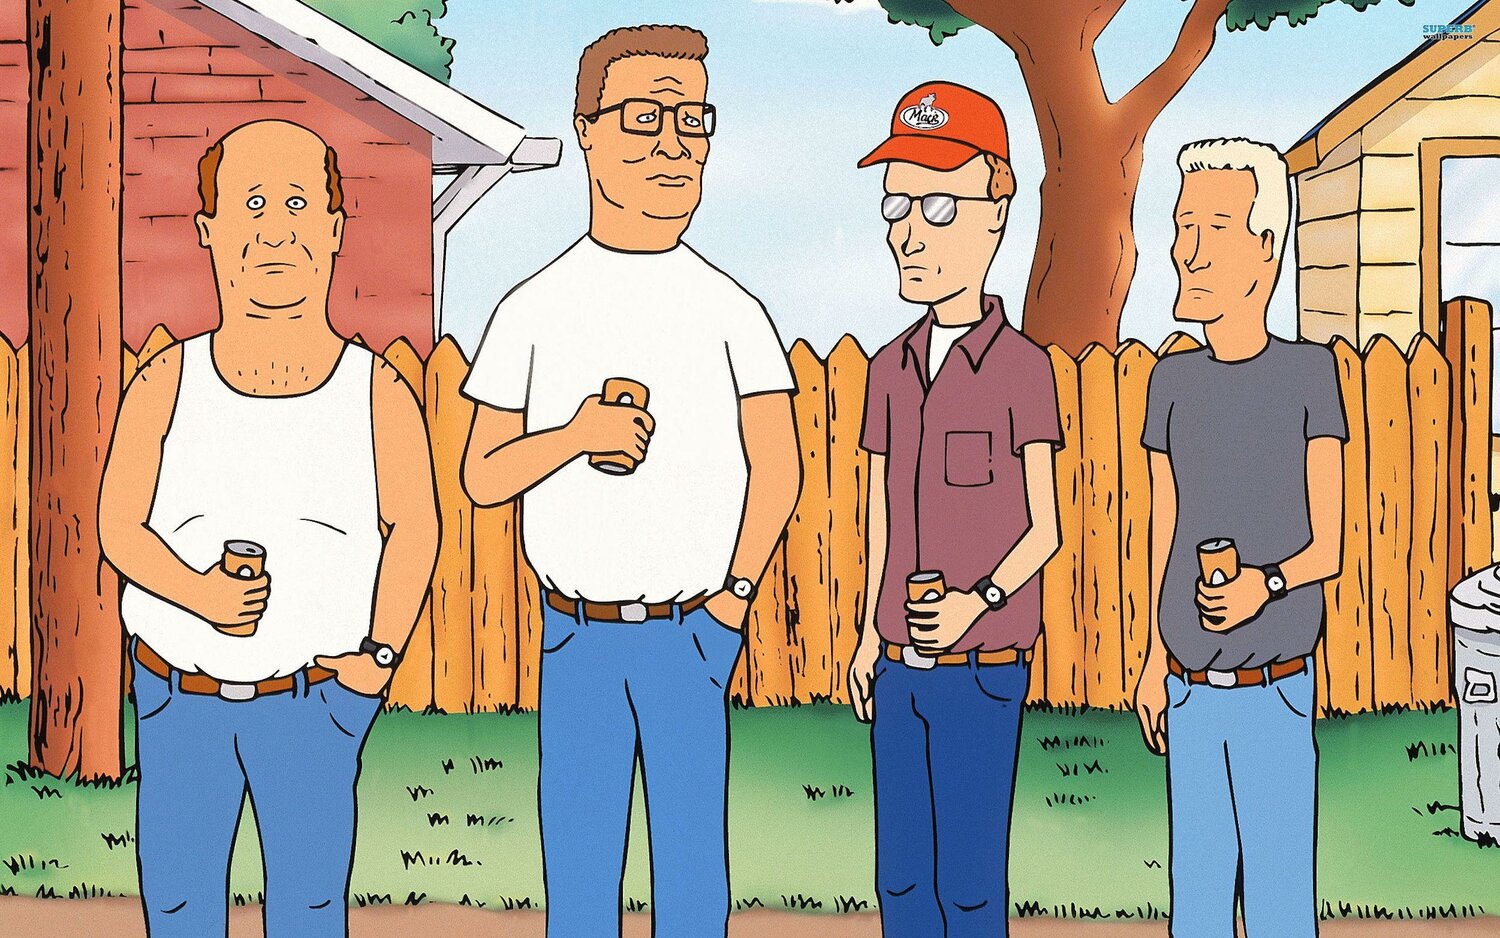 "I sell propane and propane accessories."